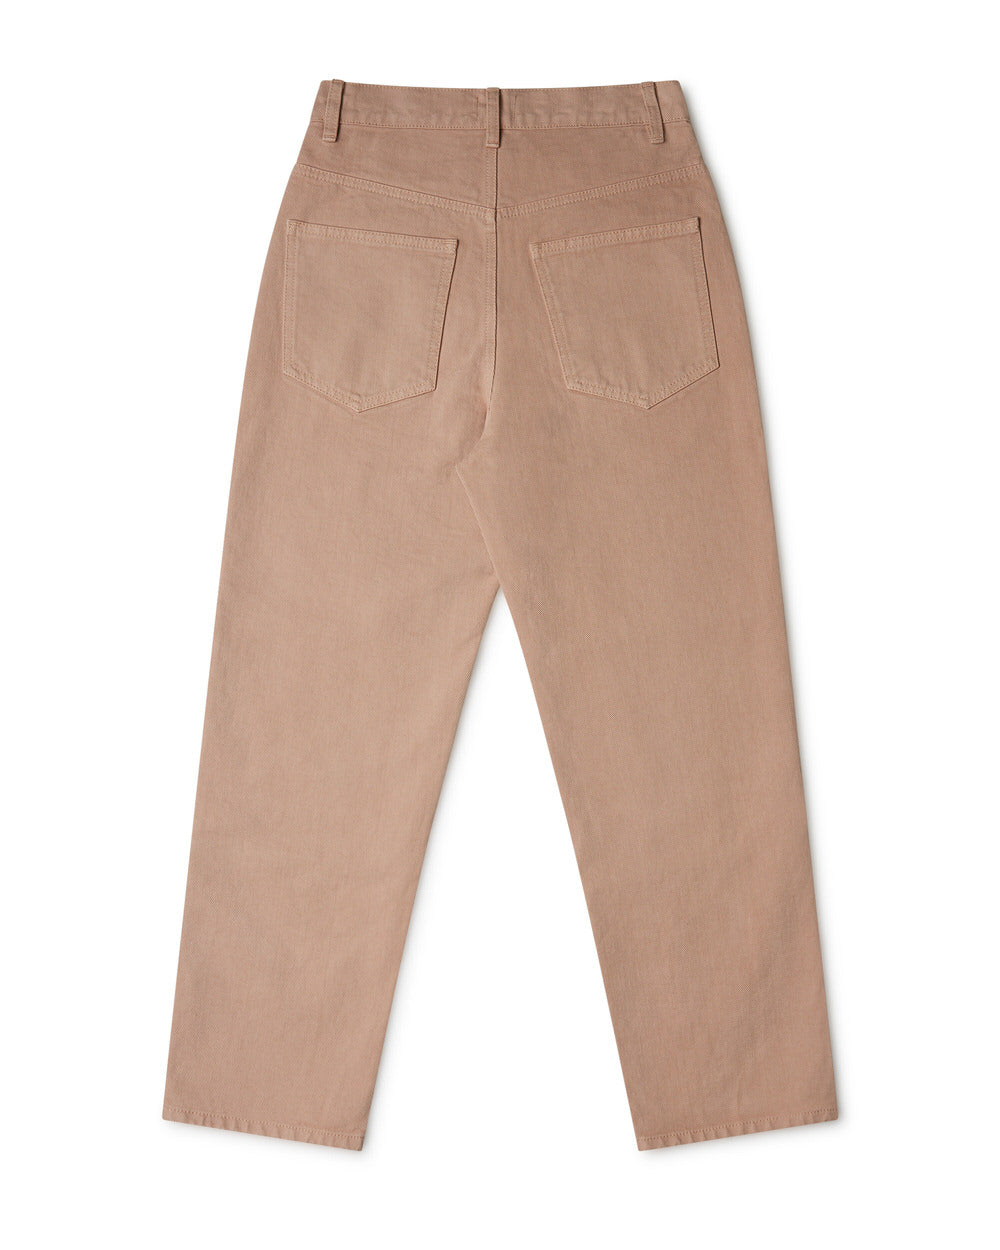 Beige, wide terracotta trousers made of organic cotton from Matona